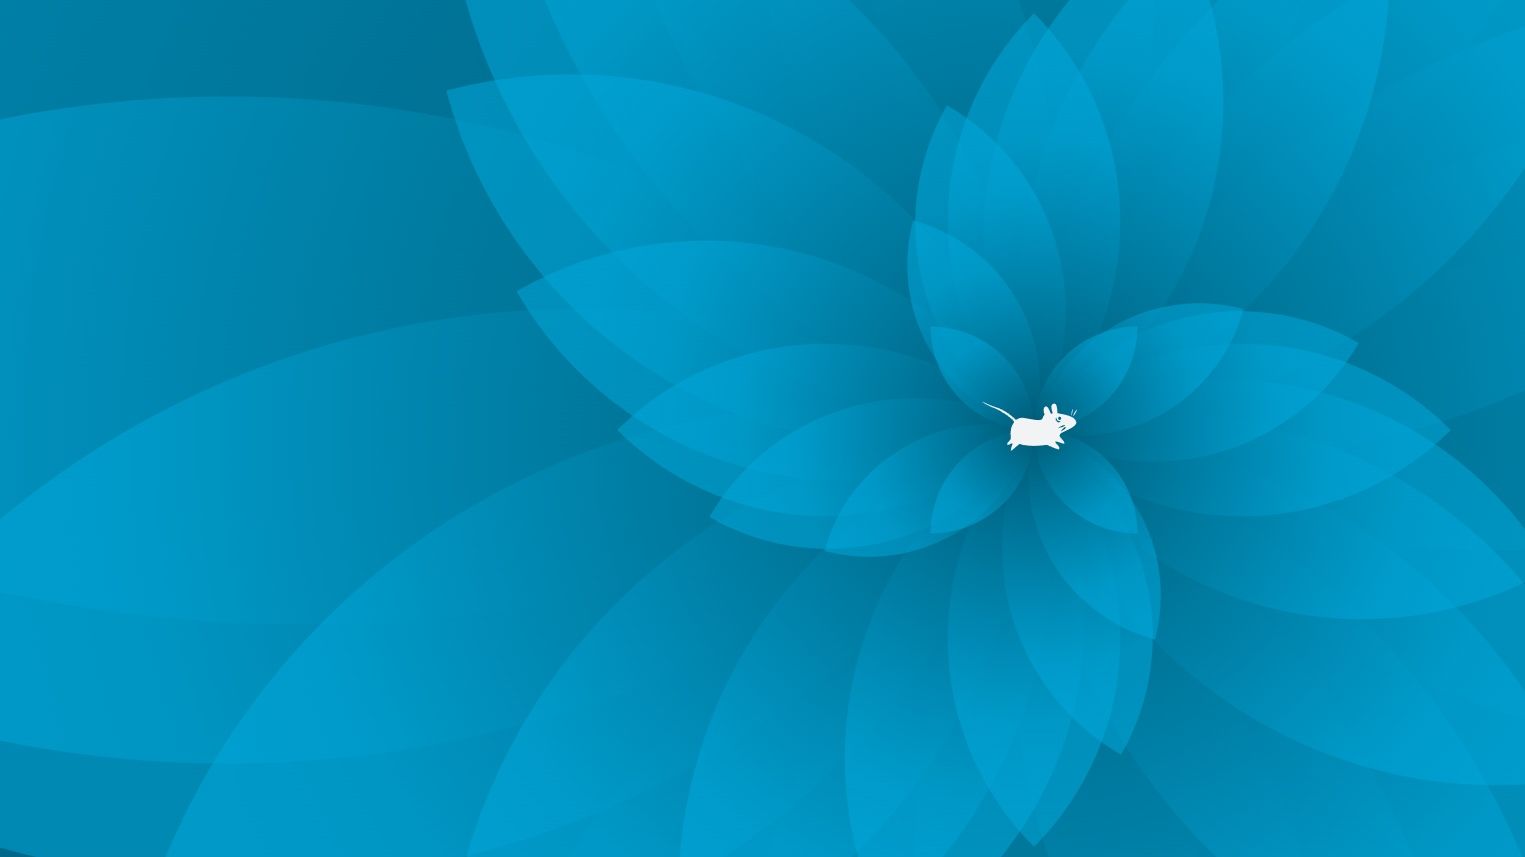 xfce 4.18 new wallpaper collection